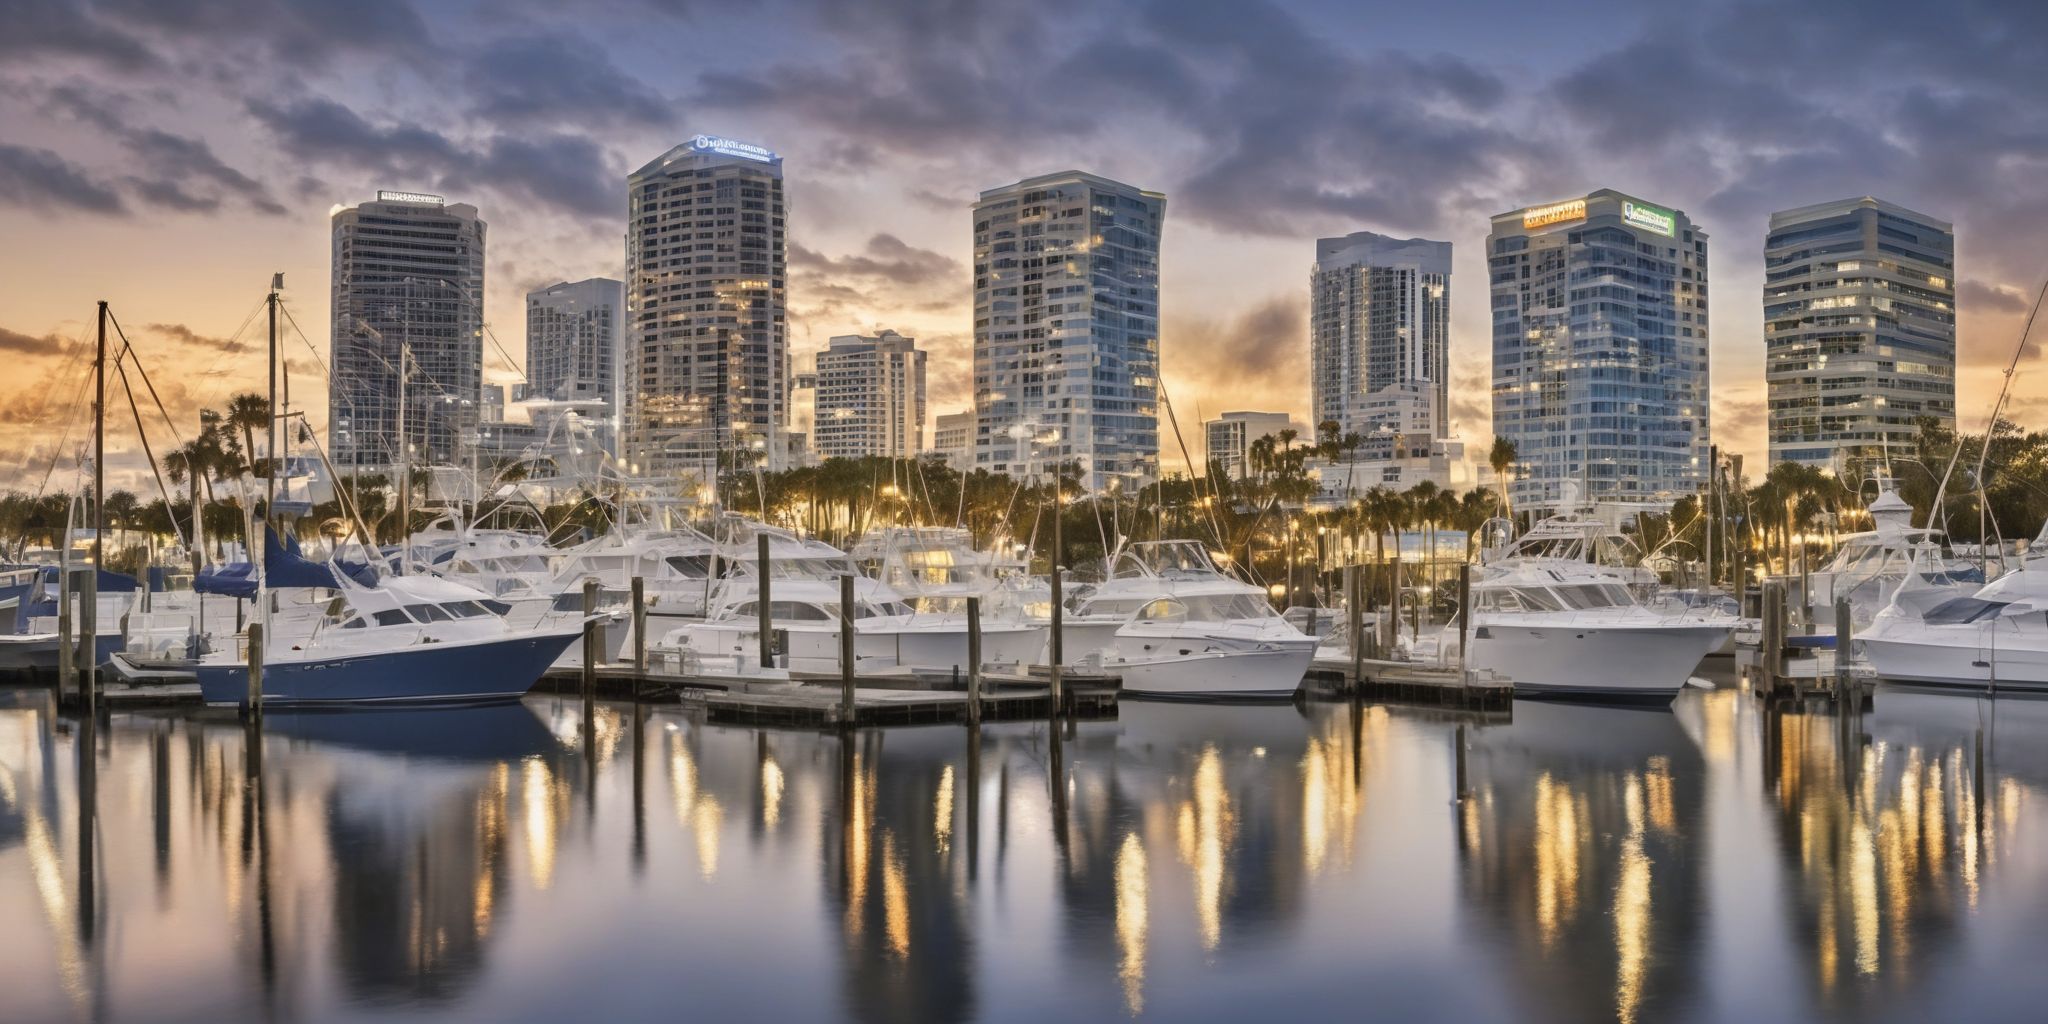 Credit Unions Tampa Bay: Harbor  in realistic, photographic style